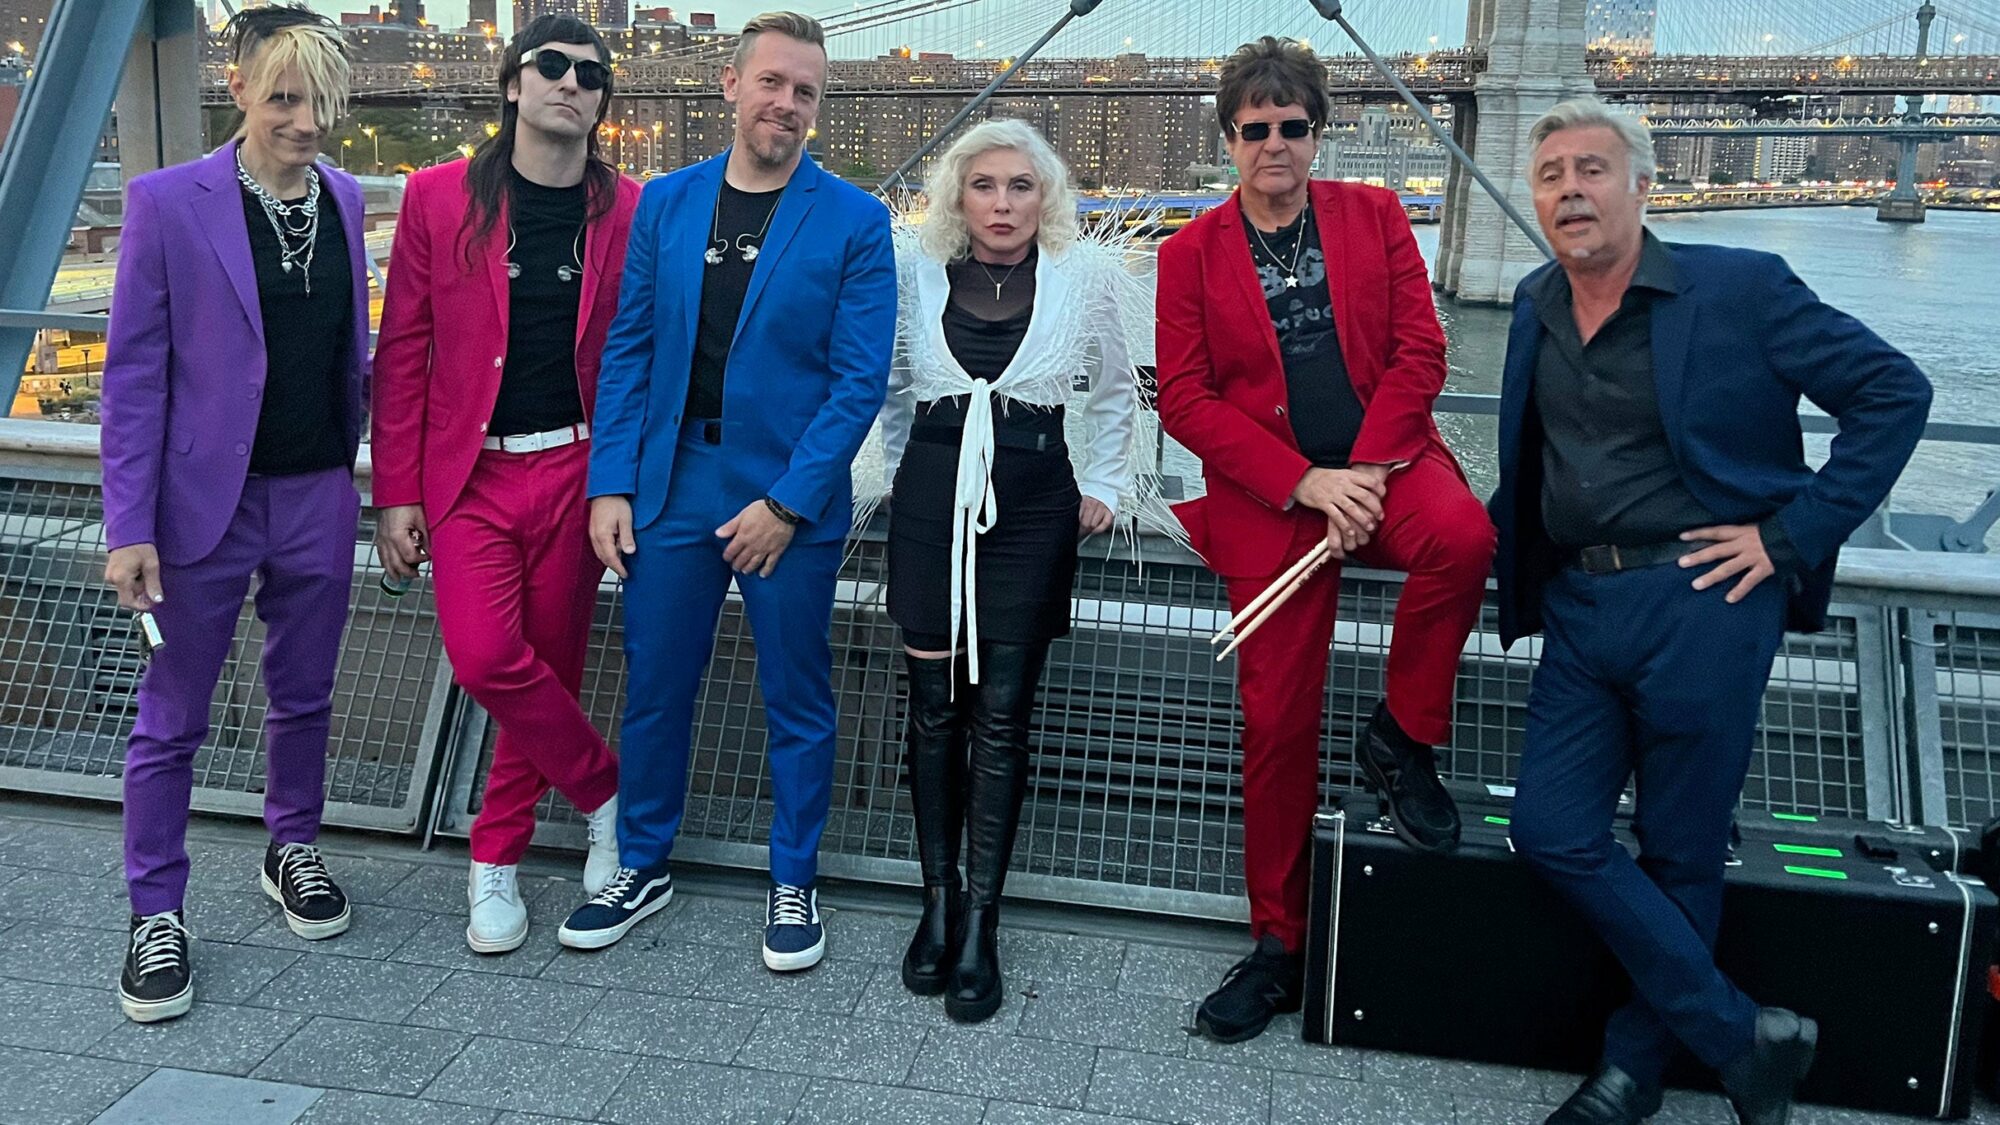 Blondie Official Ticket and Hotel Packages to Yorkshire